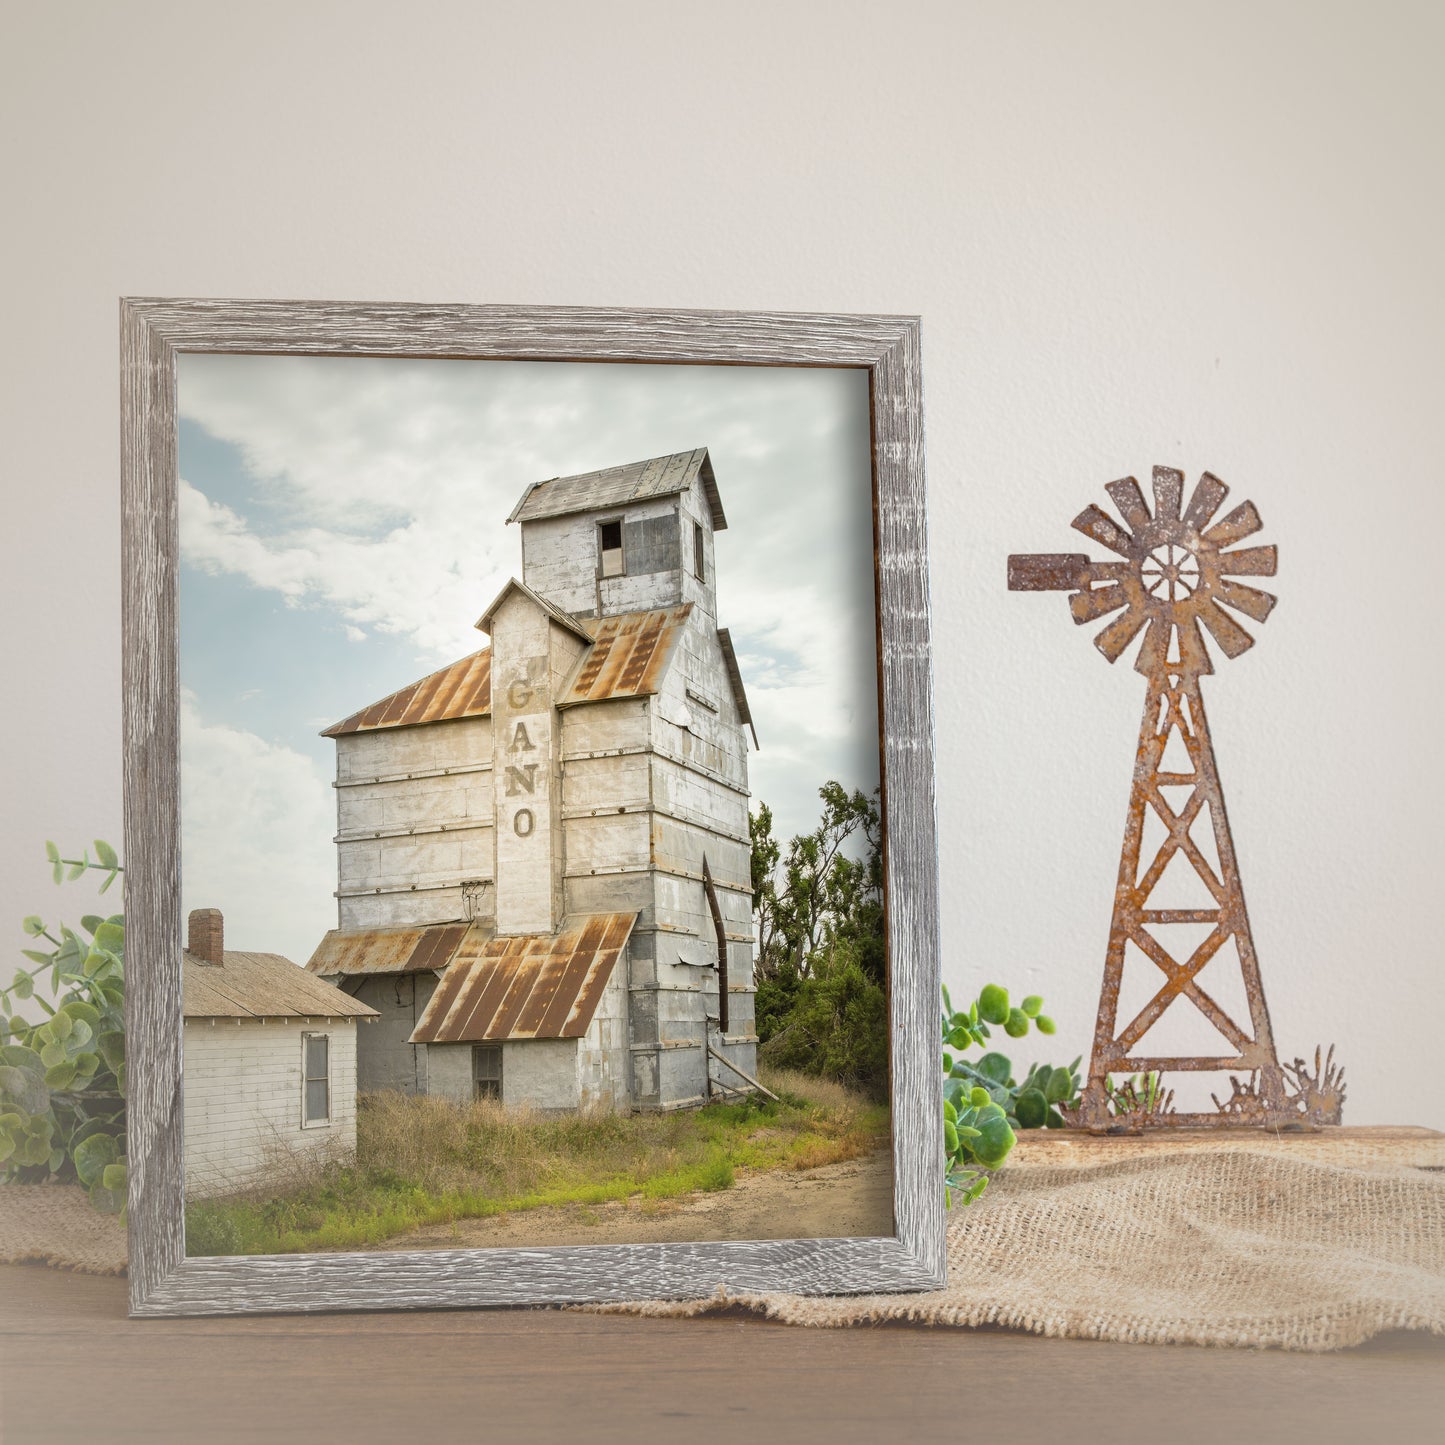 Rustic farmhouse wall art print showcasing the architectural details of the Gano Grain Elevator in Kansas, depicted in a tranquil rural setting